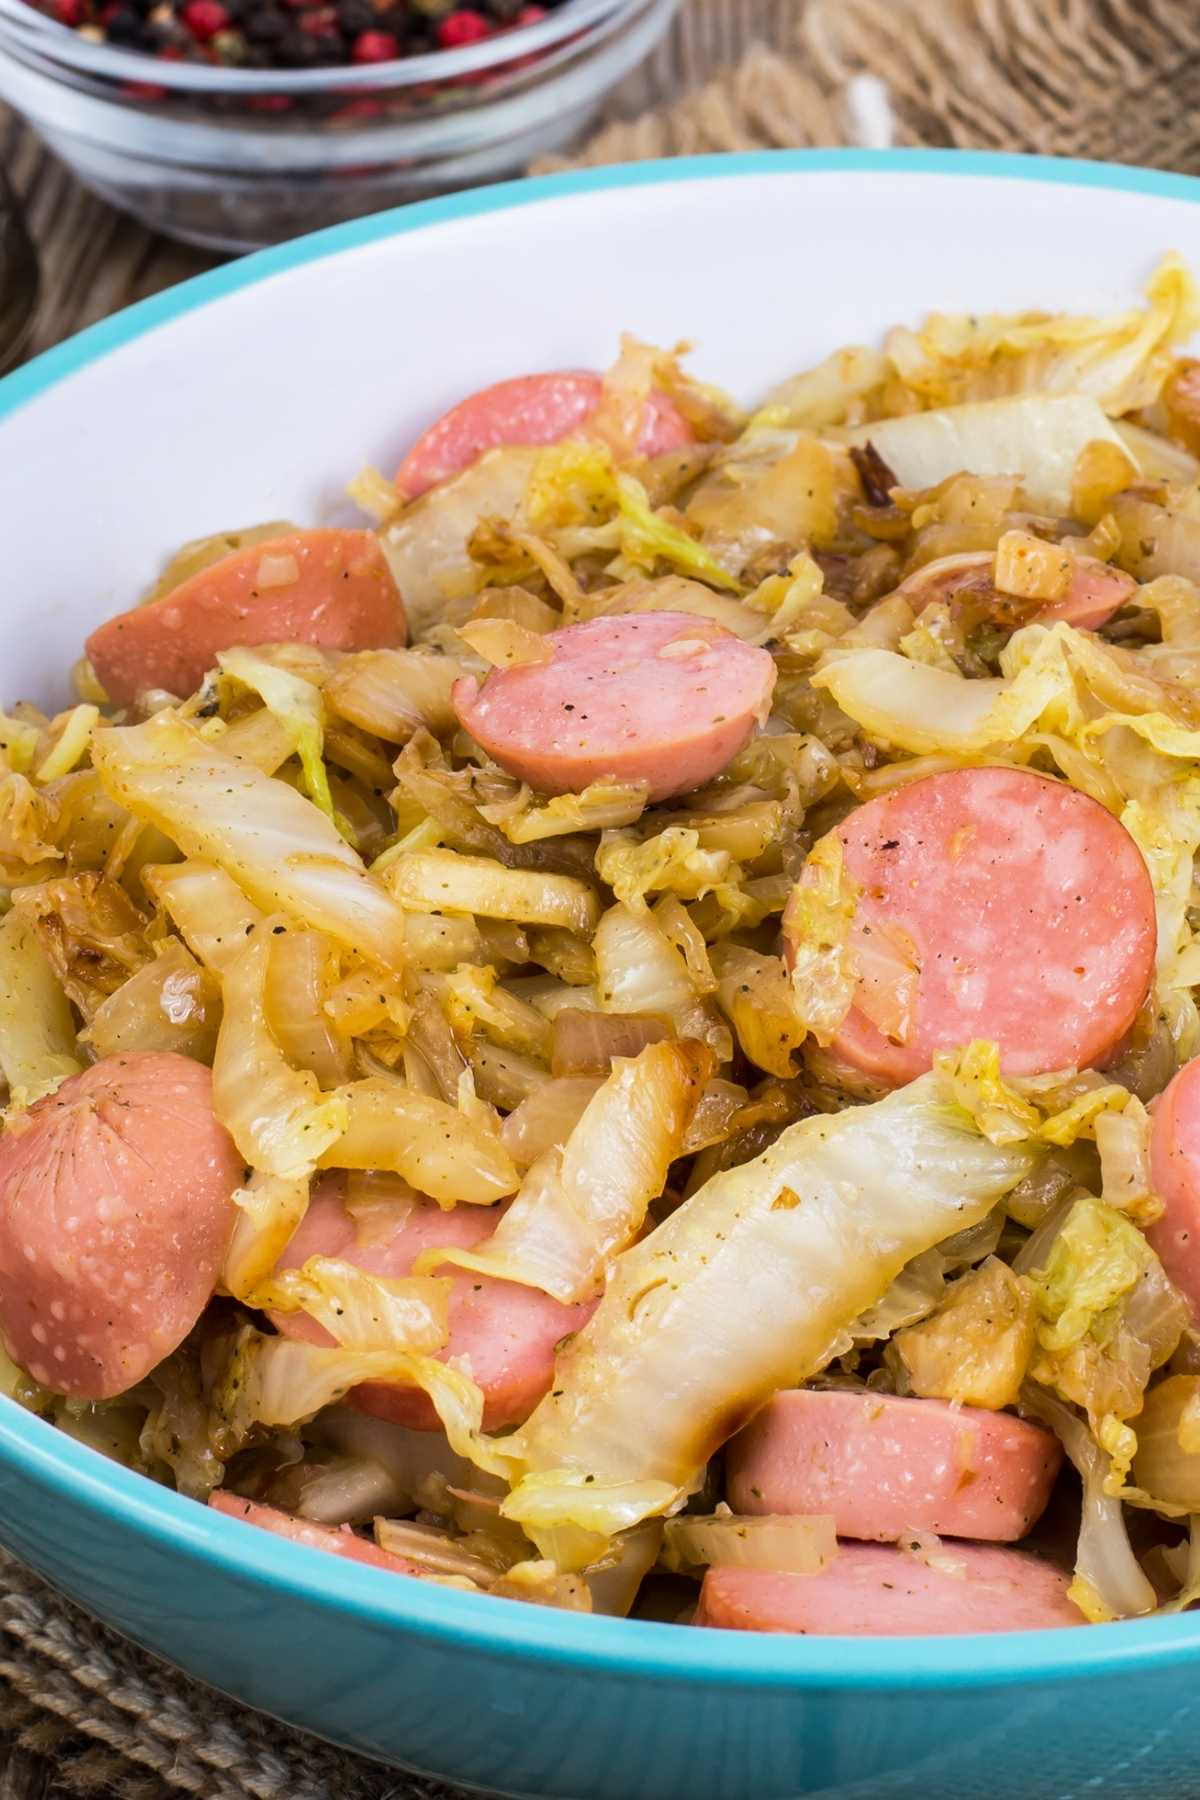 In just 40 minutes you can transform cooked sausage, sliced cabbage, and white rice into a satisfying meal! Your family will love the flavor and you’ll come back to it again and again.